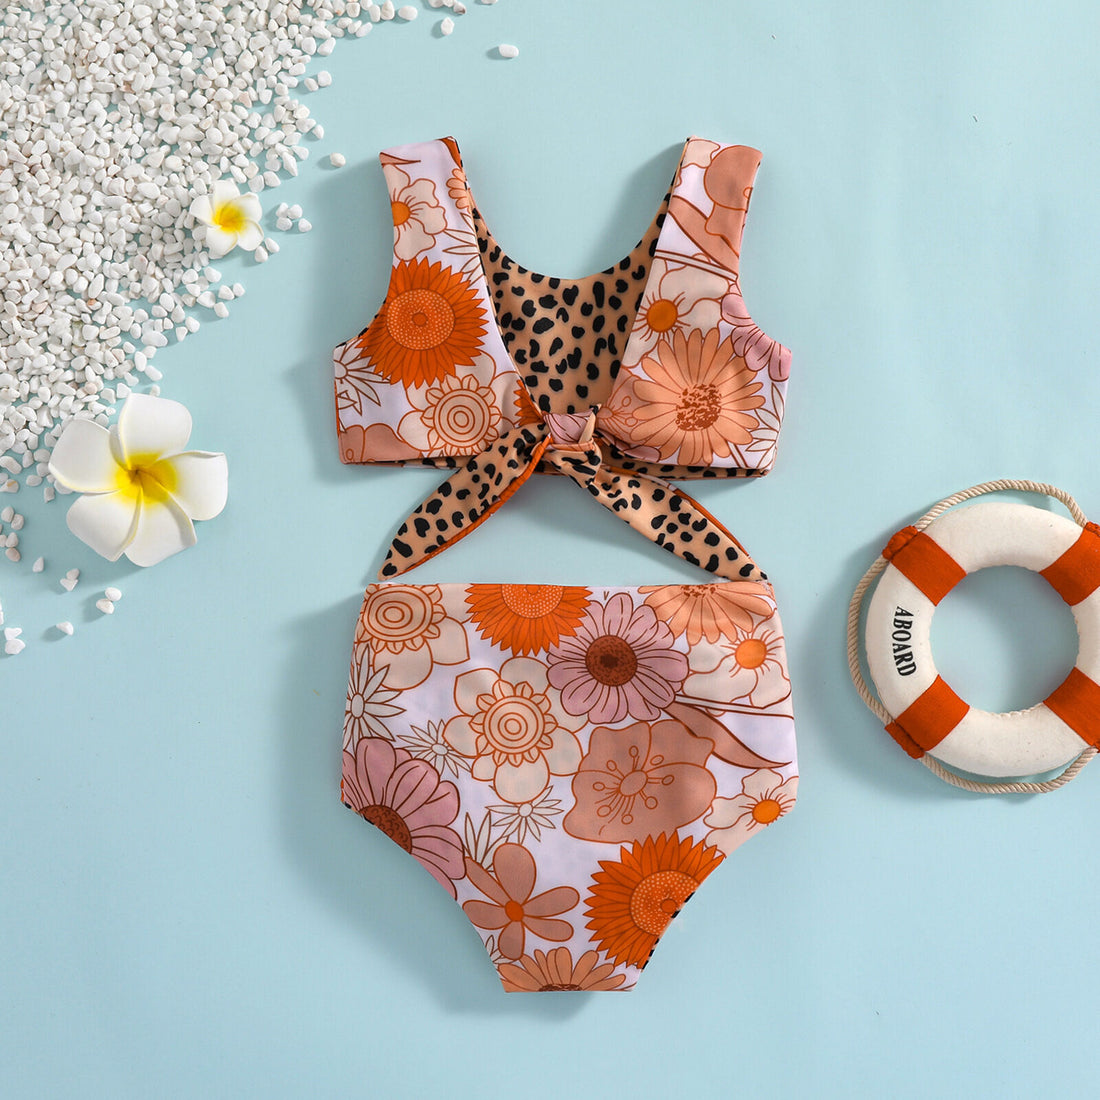 Reversible Two Piece Swimsuit - That's So Darling